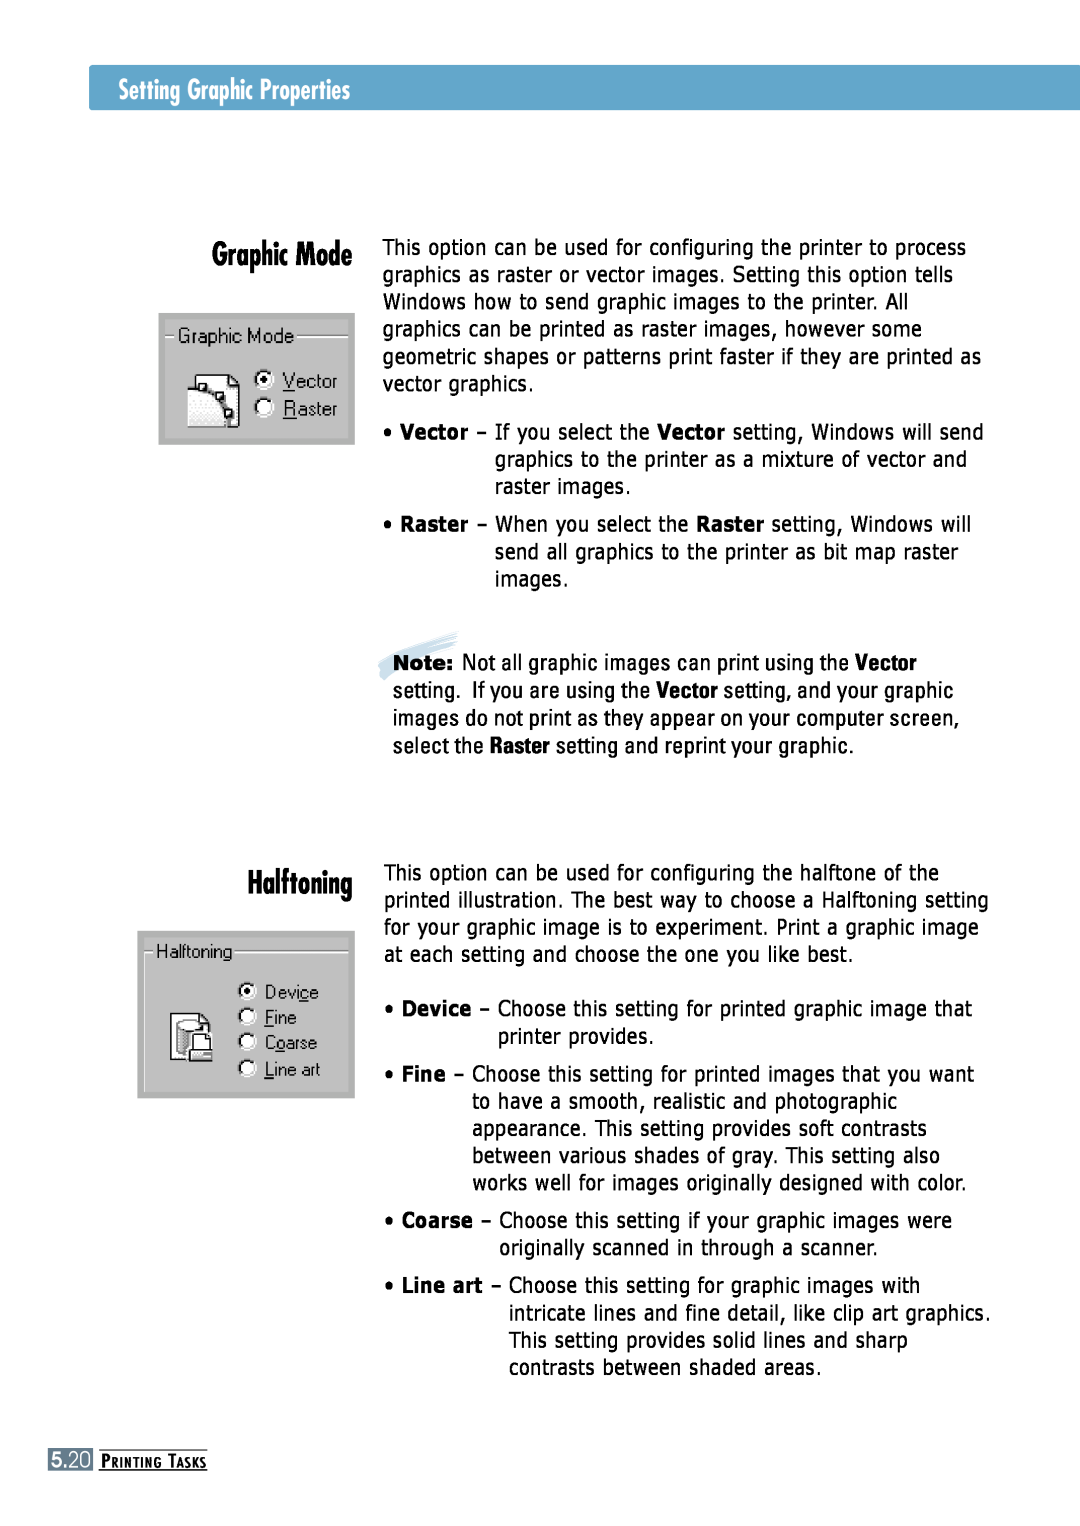 Samsung ML-6060 manual Setting Graphic Properties, No te Not all graphic images can print using the Vector, Graphic Mode 